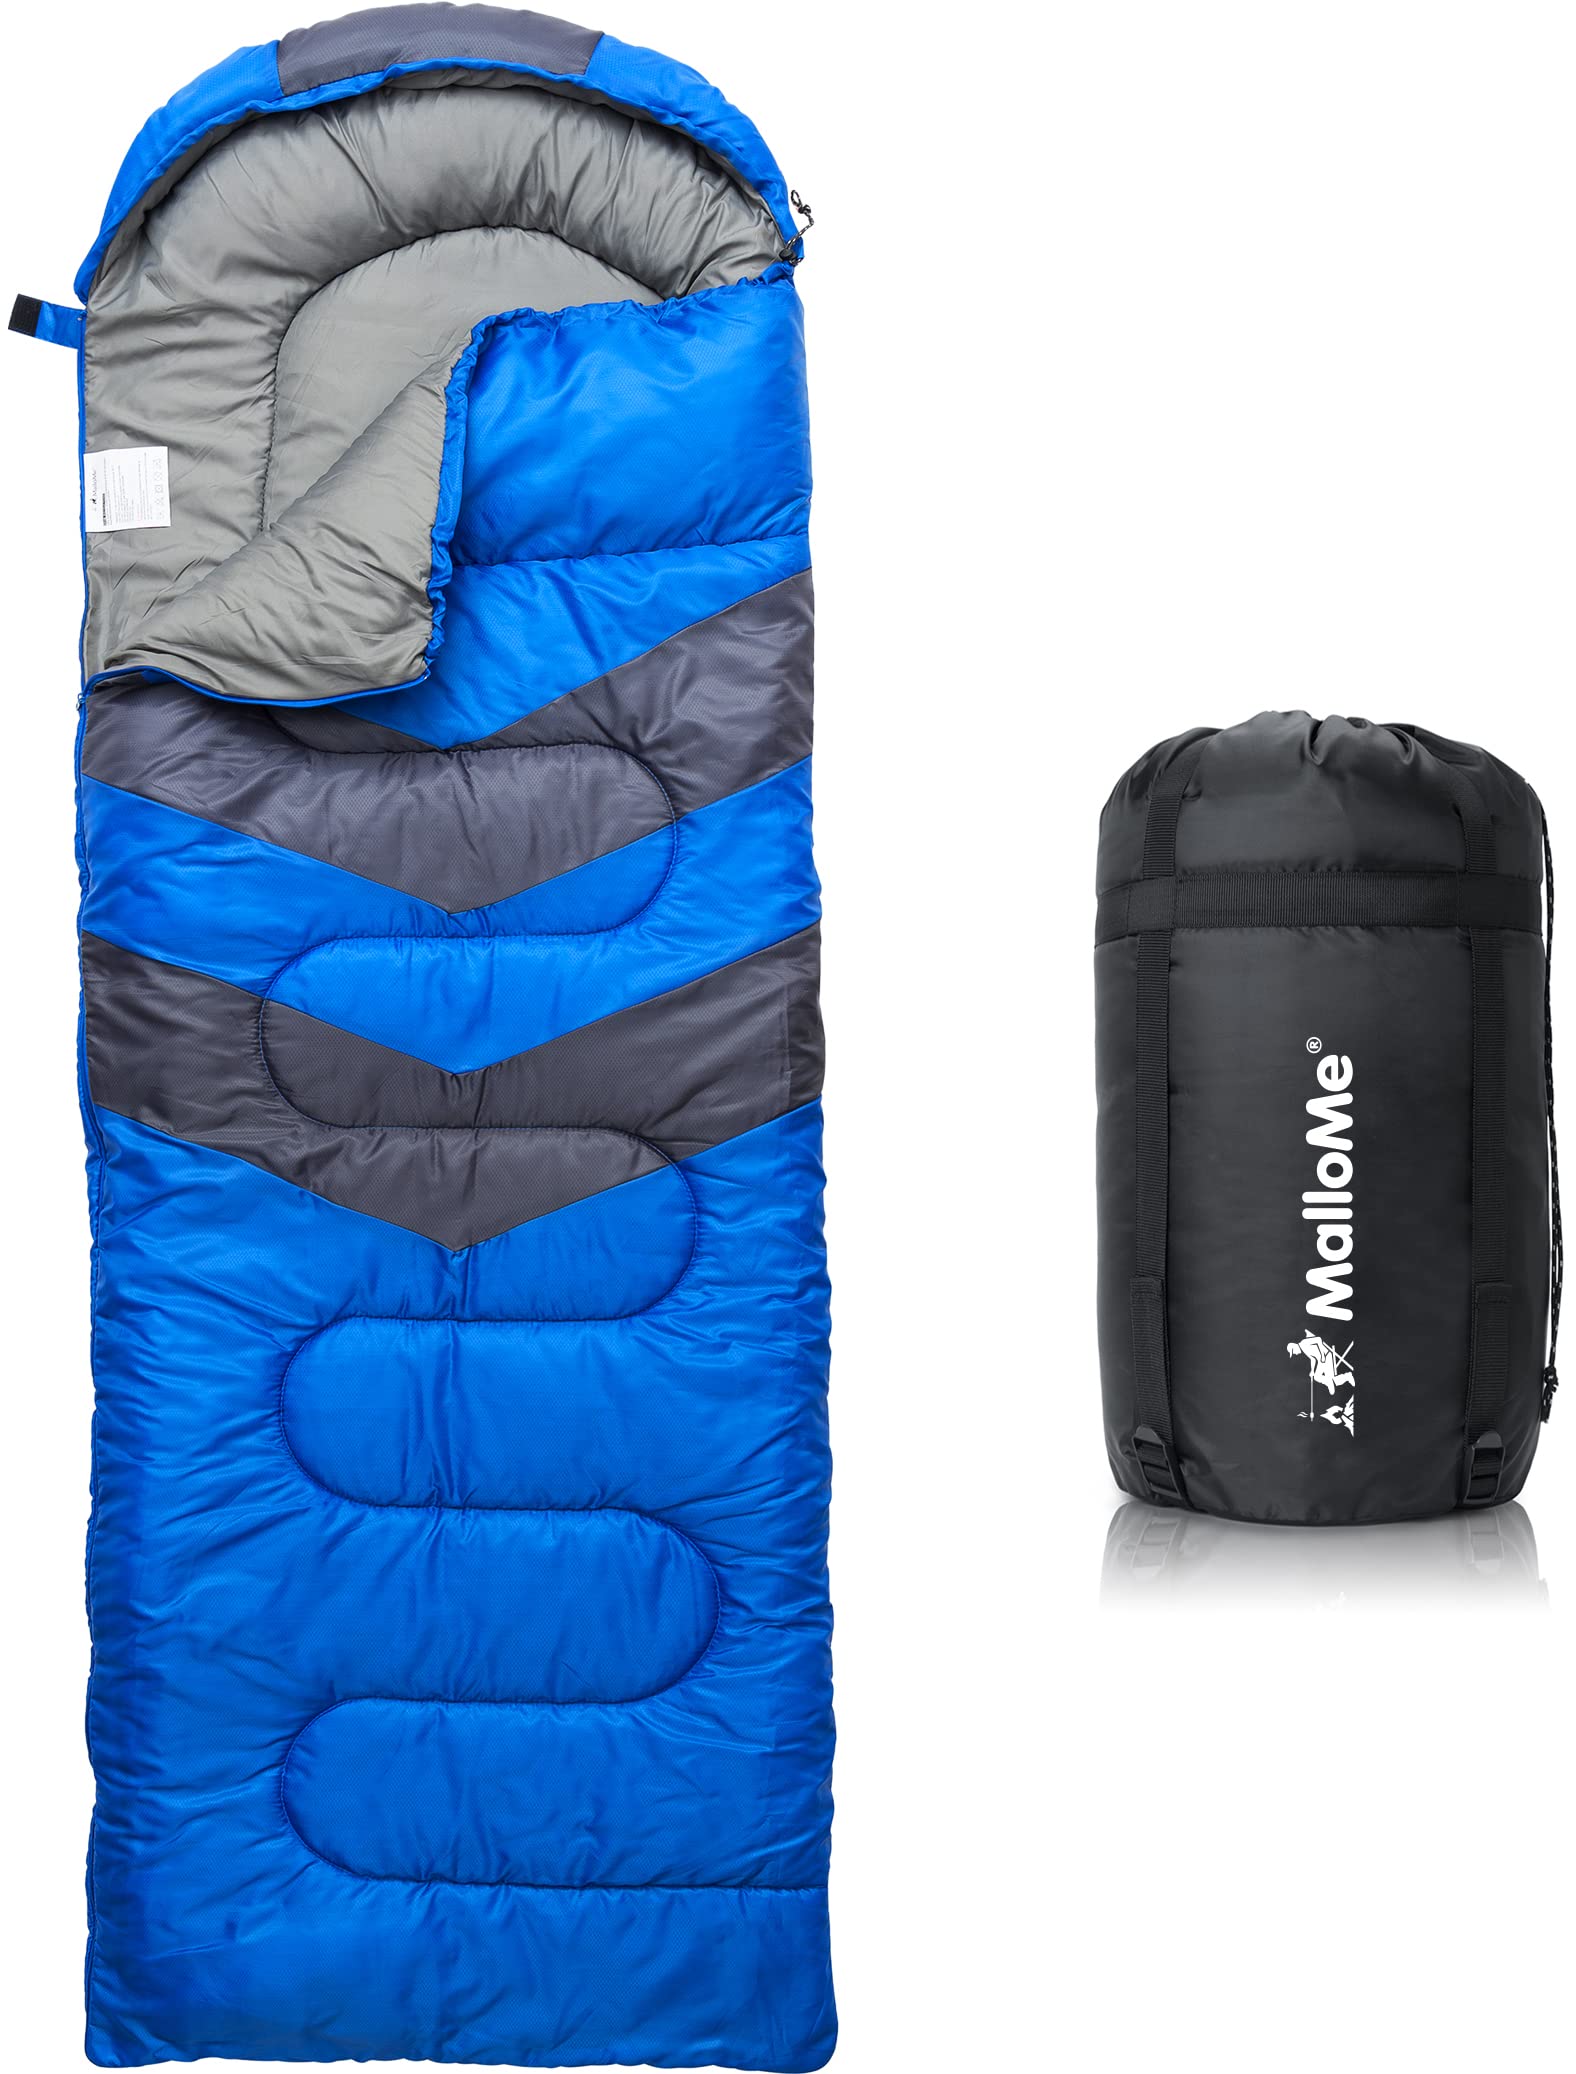 Sleeping Bags for Adults Cold Weather & Warm - Lightweight Compact Camping  Sleeping Bag for Kids 10-12 Men Girls & Boys Hiking & Backpacking - Camping  Accessories Summer Winter Sleep Gear Essentials